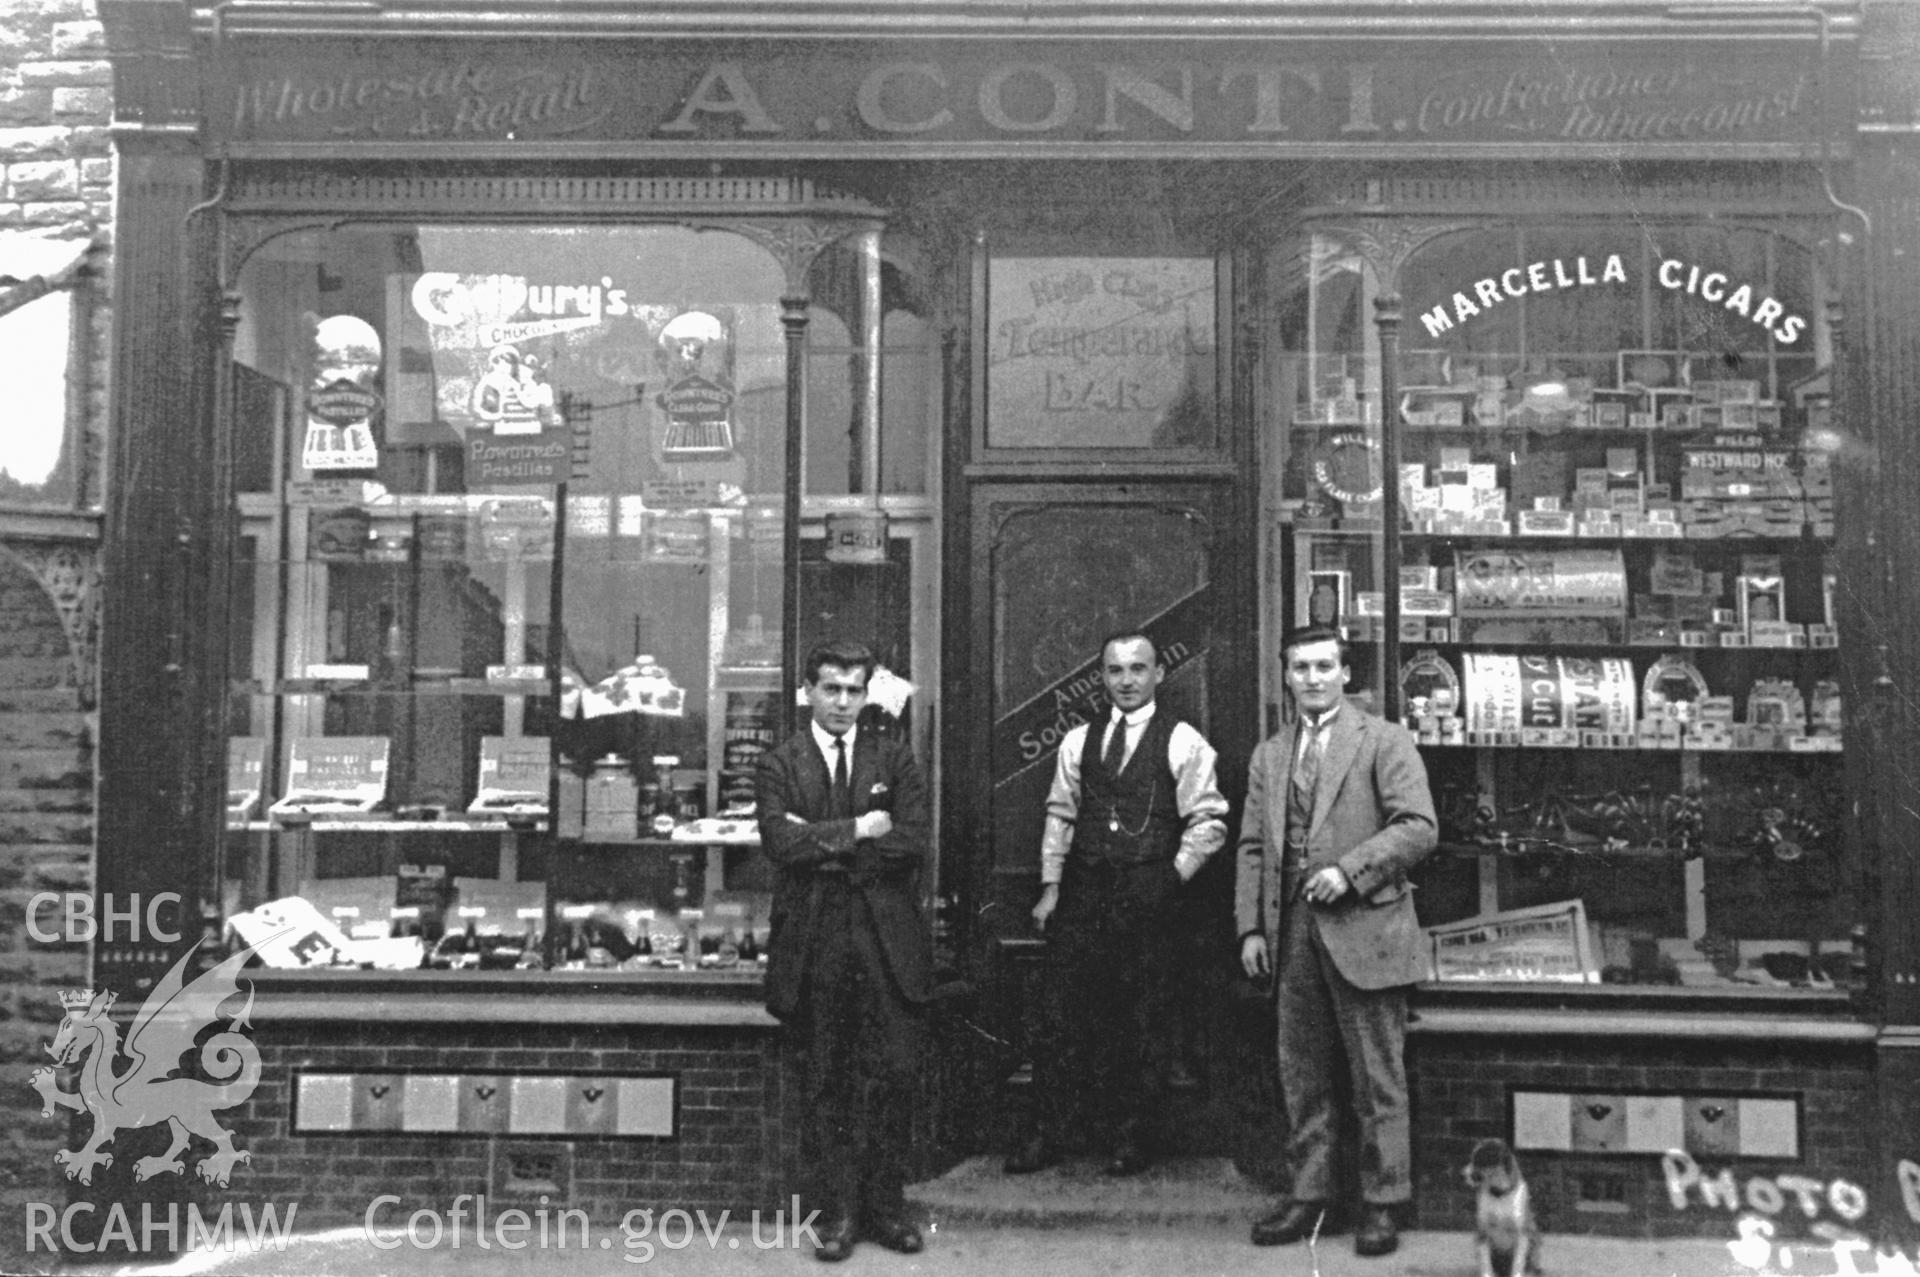 Attilio Conti and his brothers, Alf and Jack, outside the first Conti's cafe in Ystradgynlais.